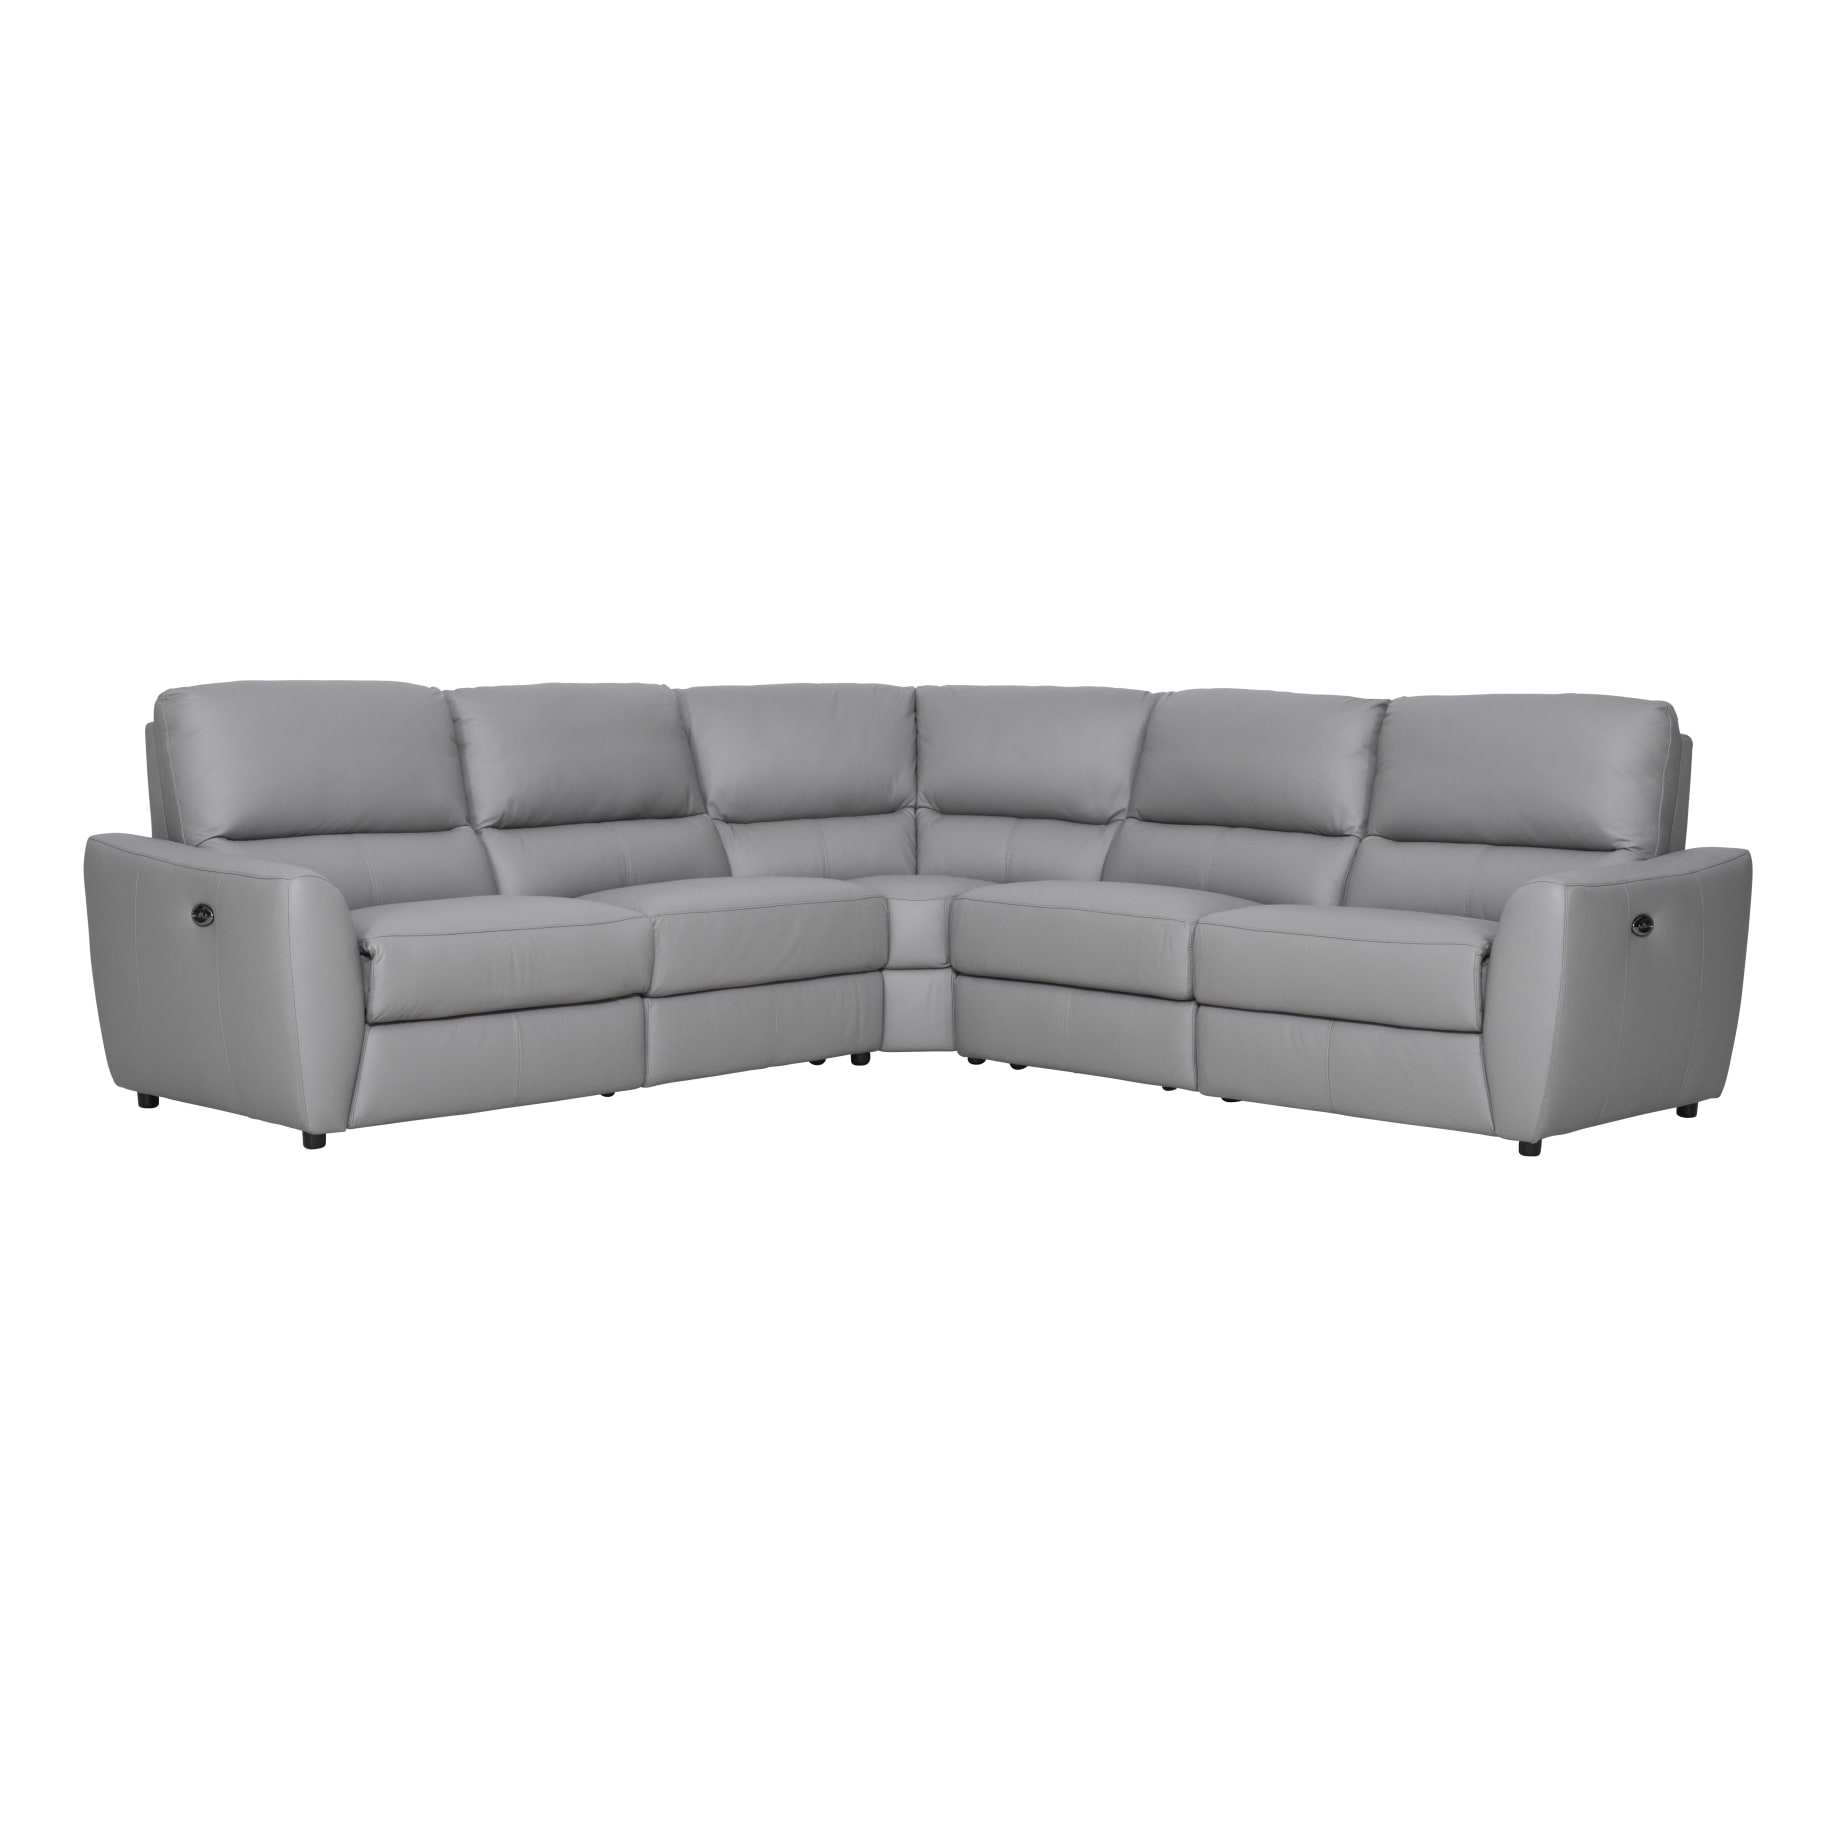 Portland Modular with 2 Recliners in Pewter